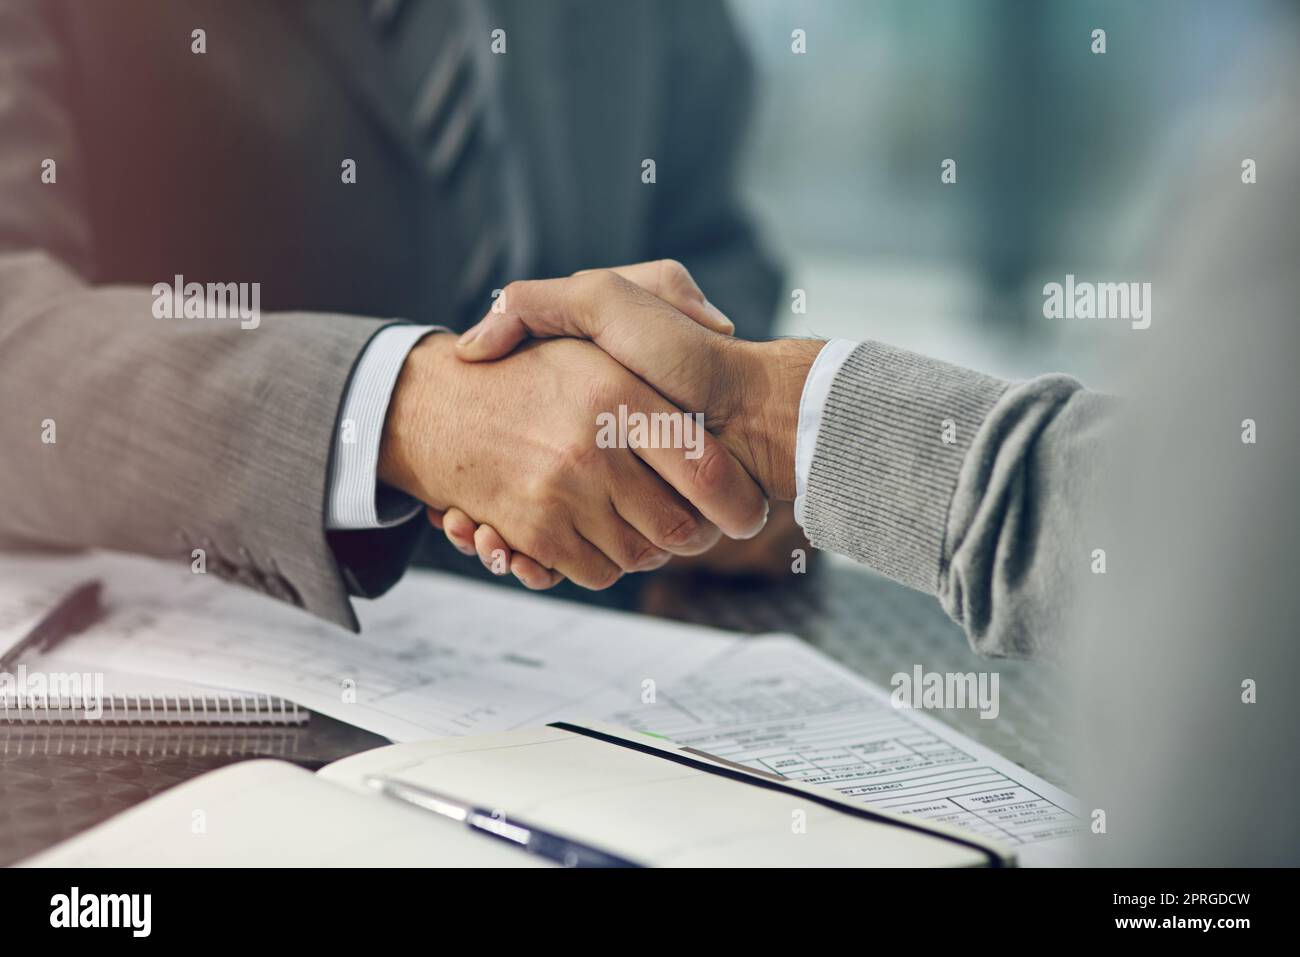 Theyve reached an agreement. two unrecognizable businessmen shaking hands in an office. Stock Photo